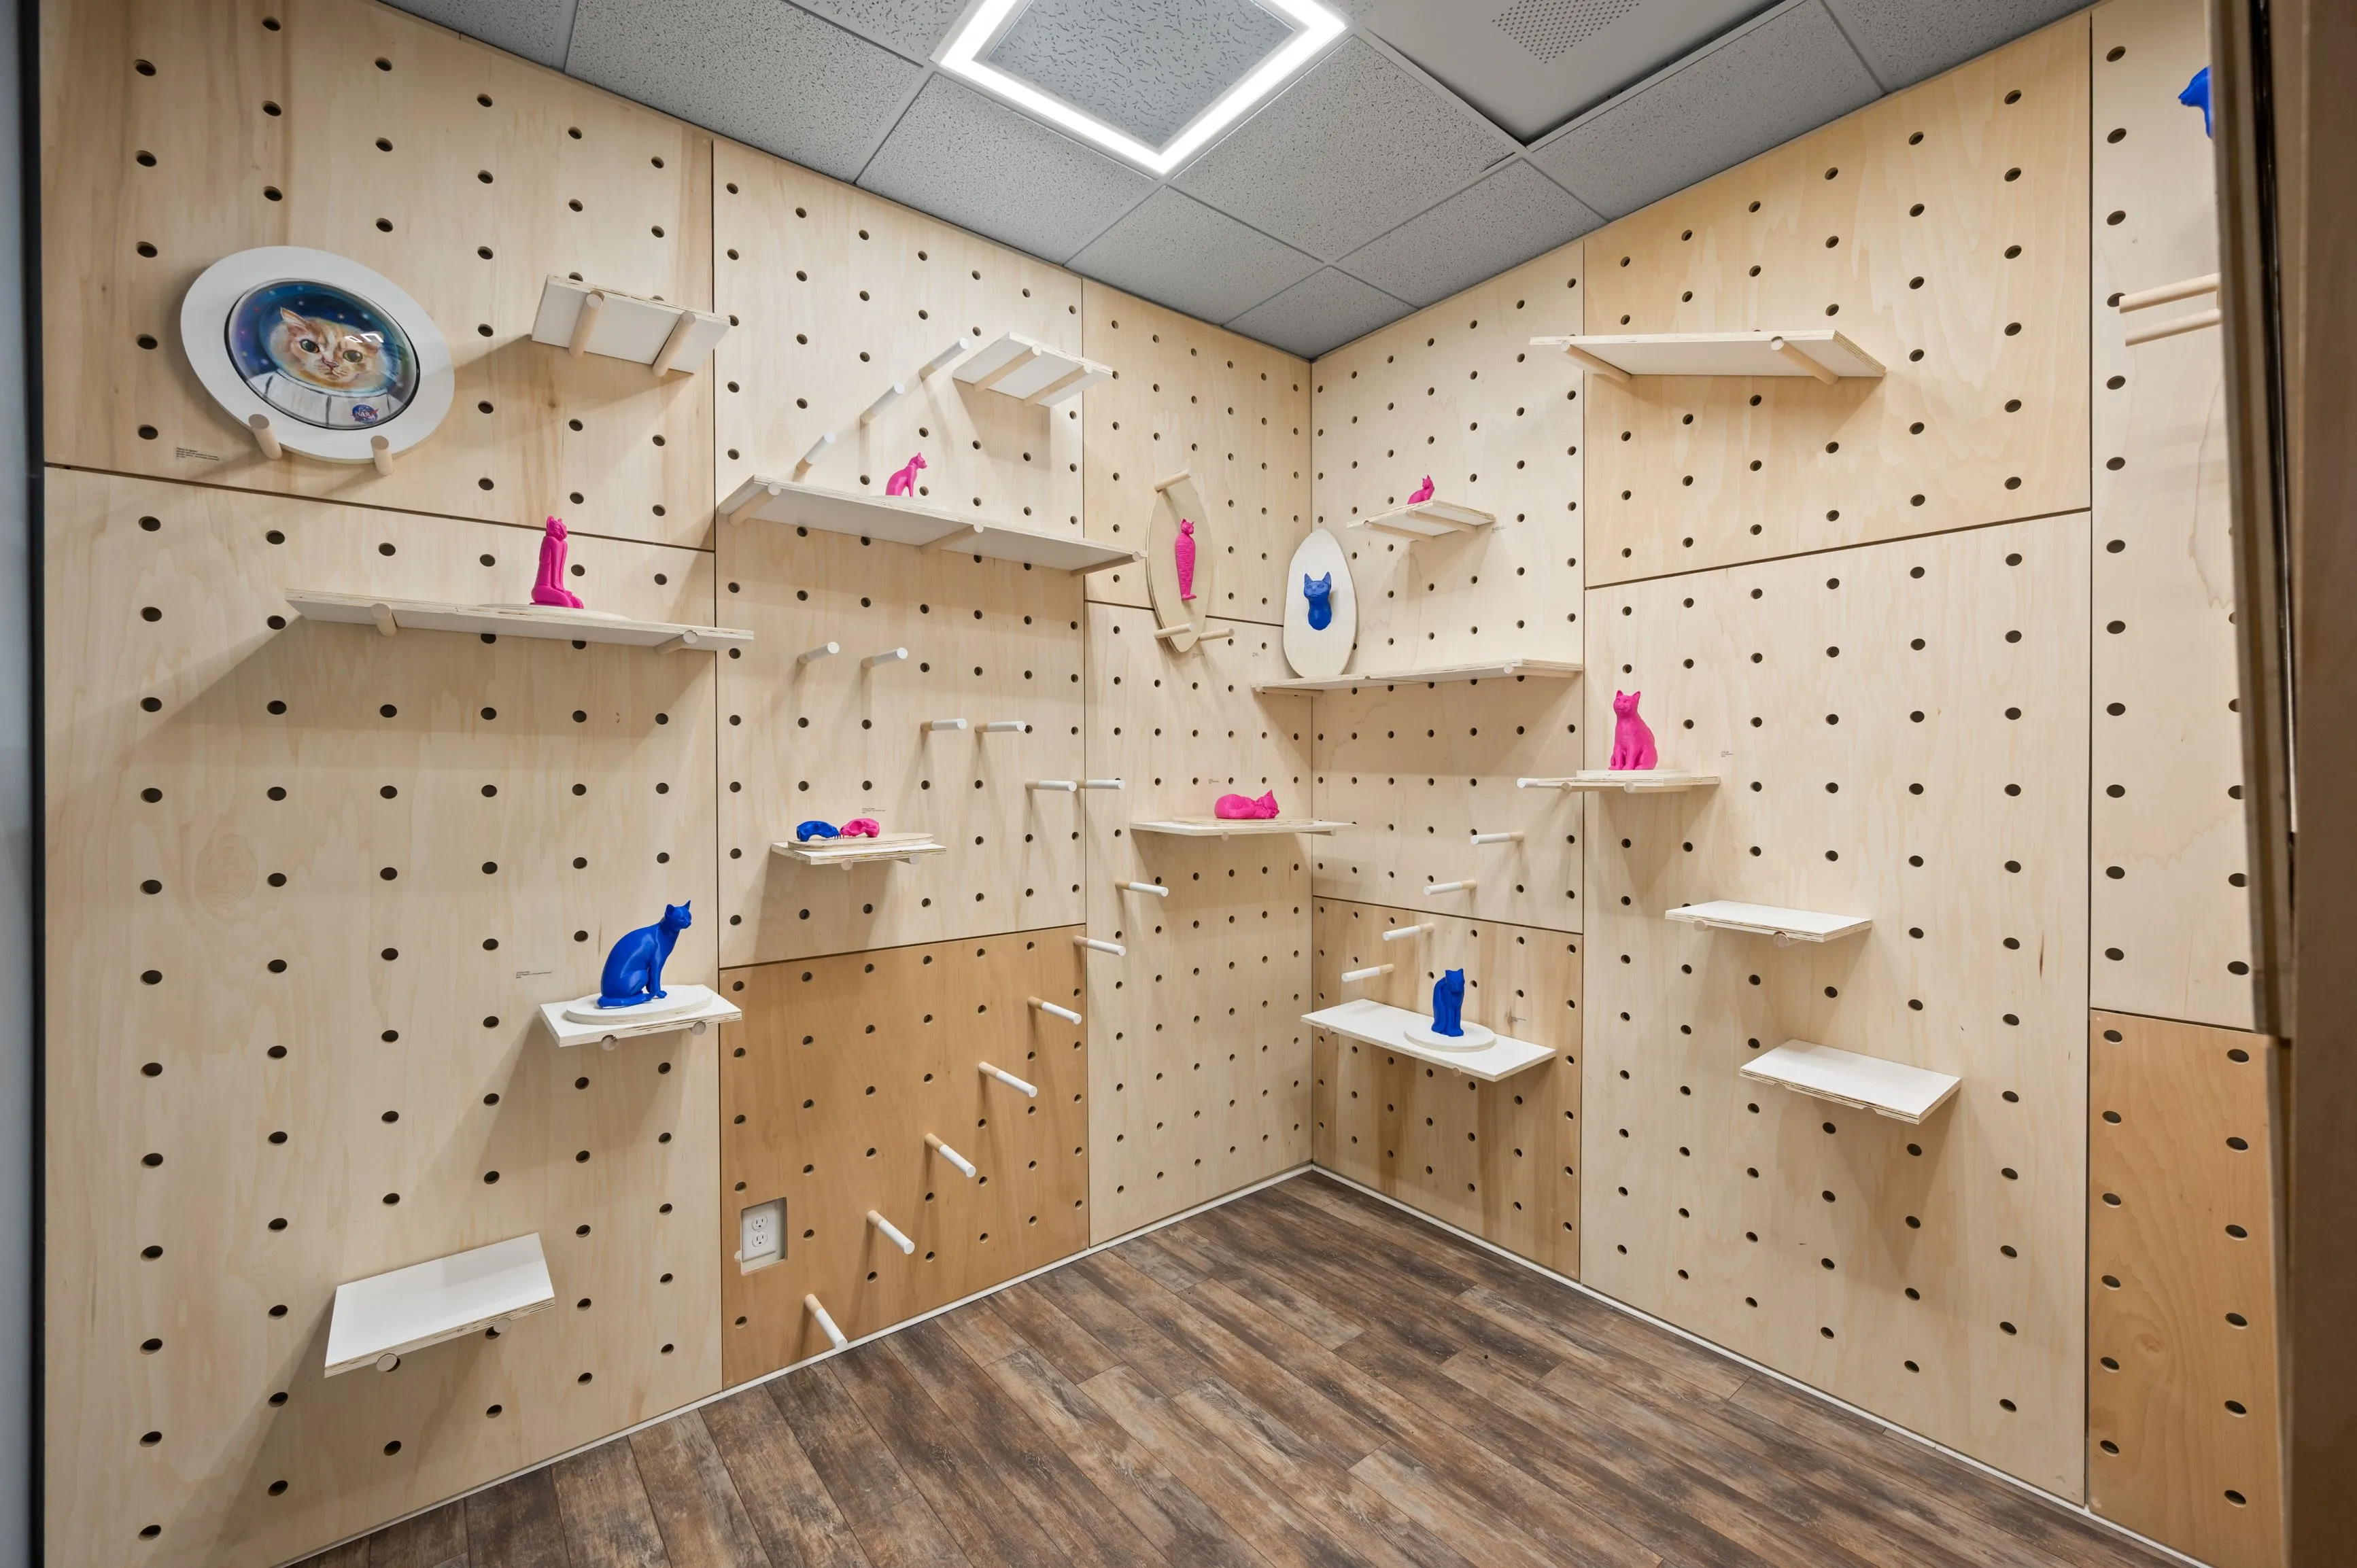 A cat-friendly room with multiple wooden shelves and climbing aids attached to pegboard walls, designed for cat play and exploration.